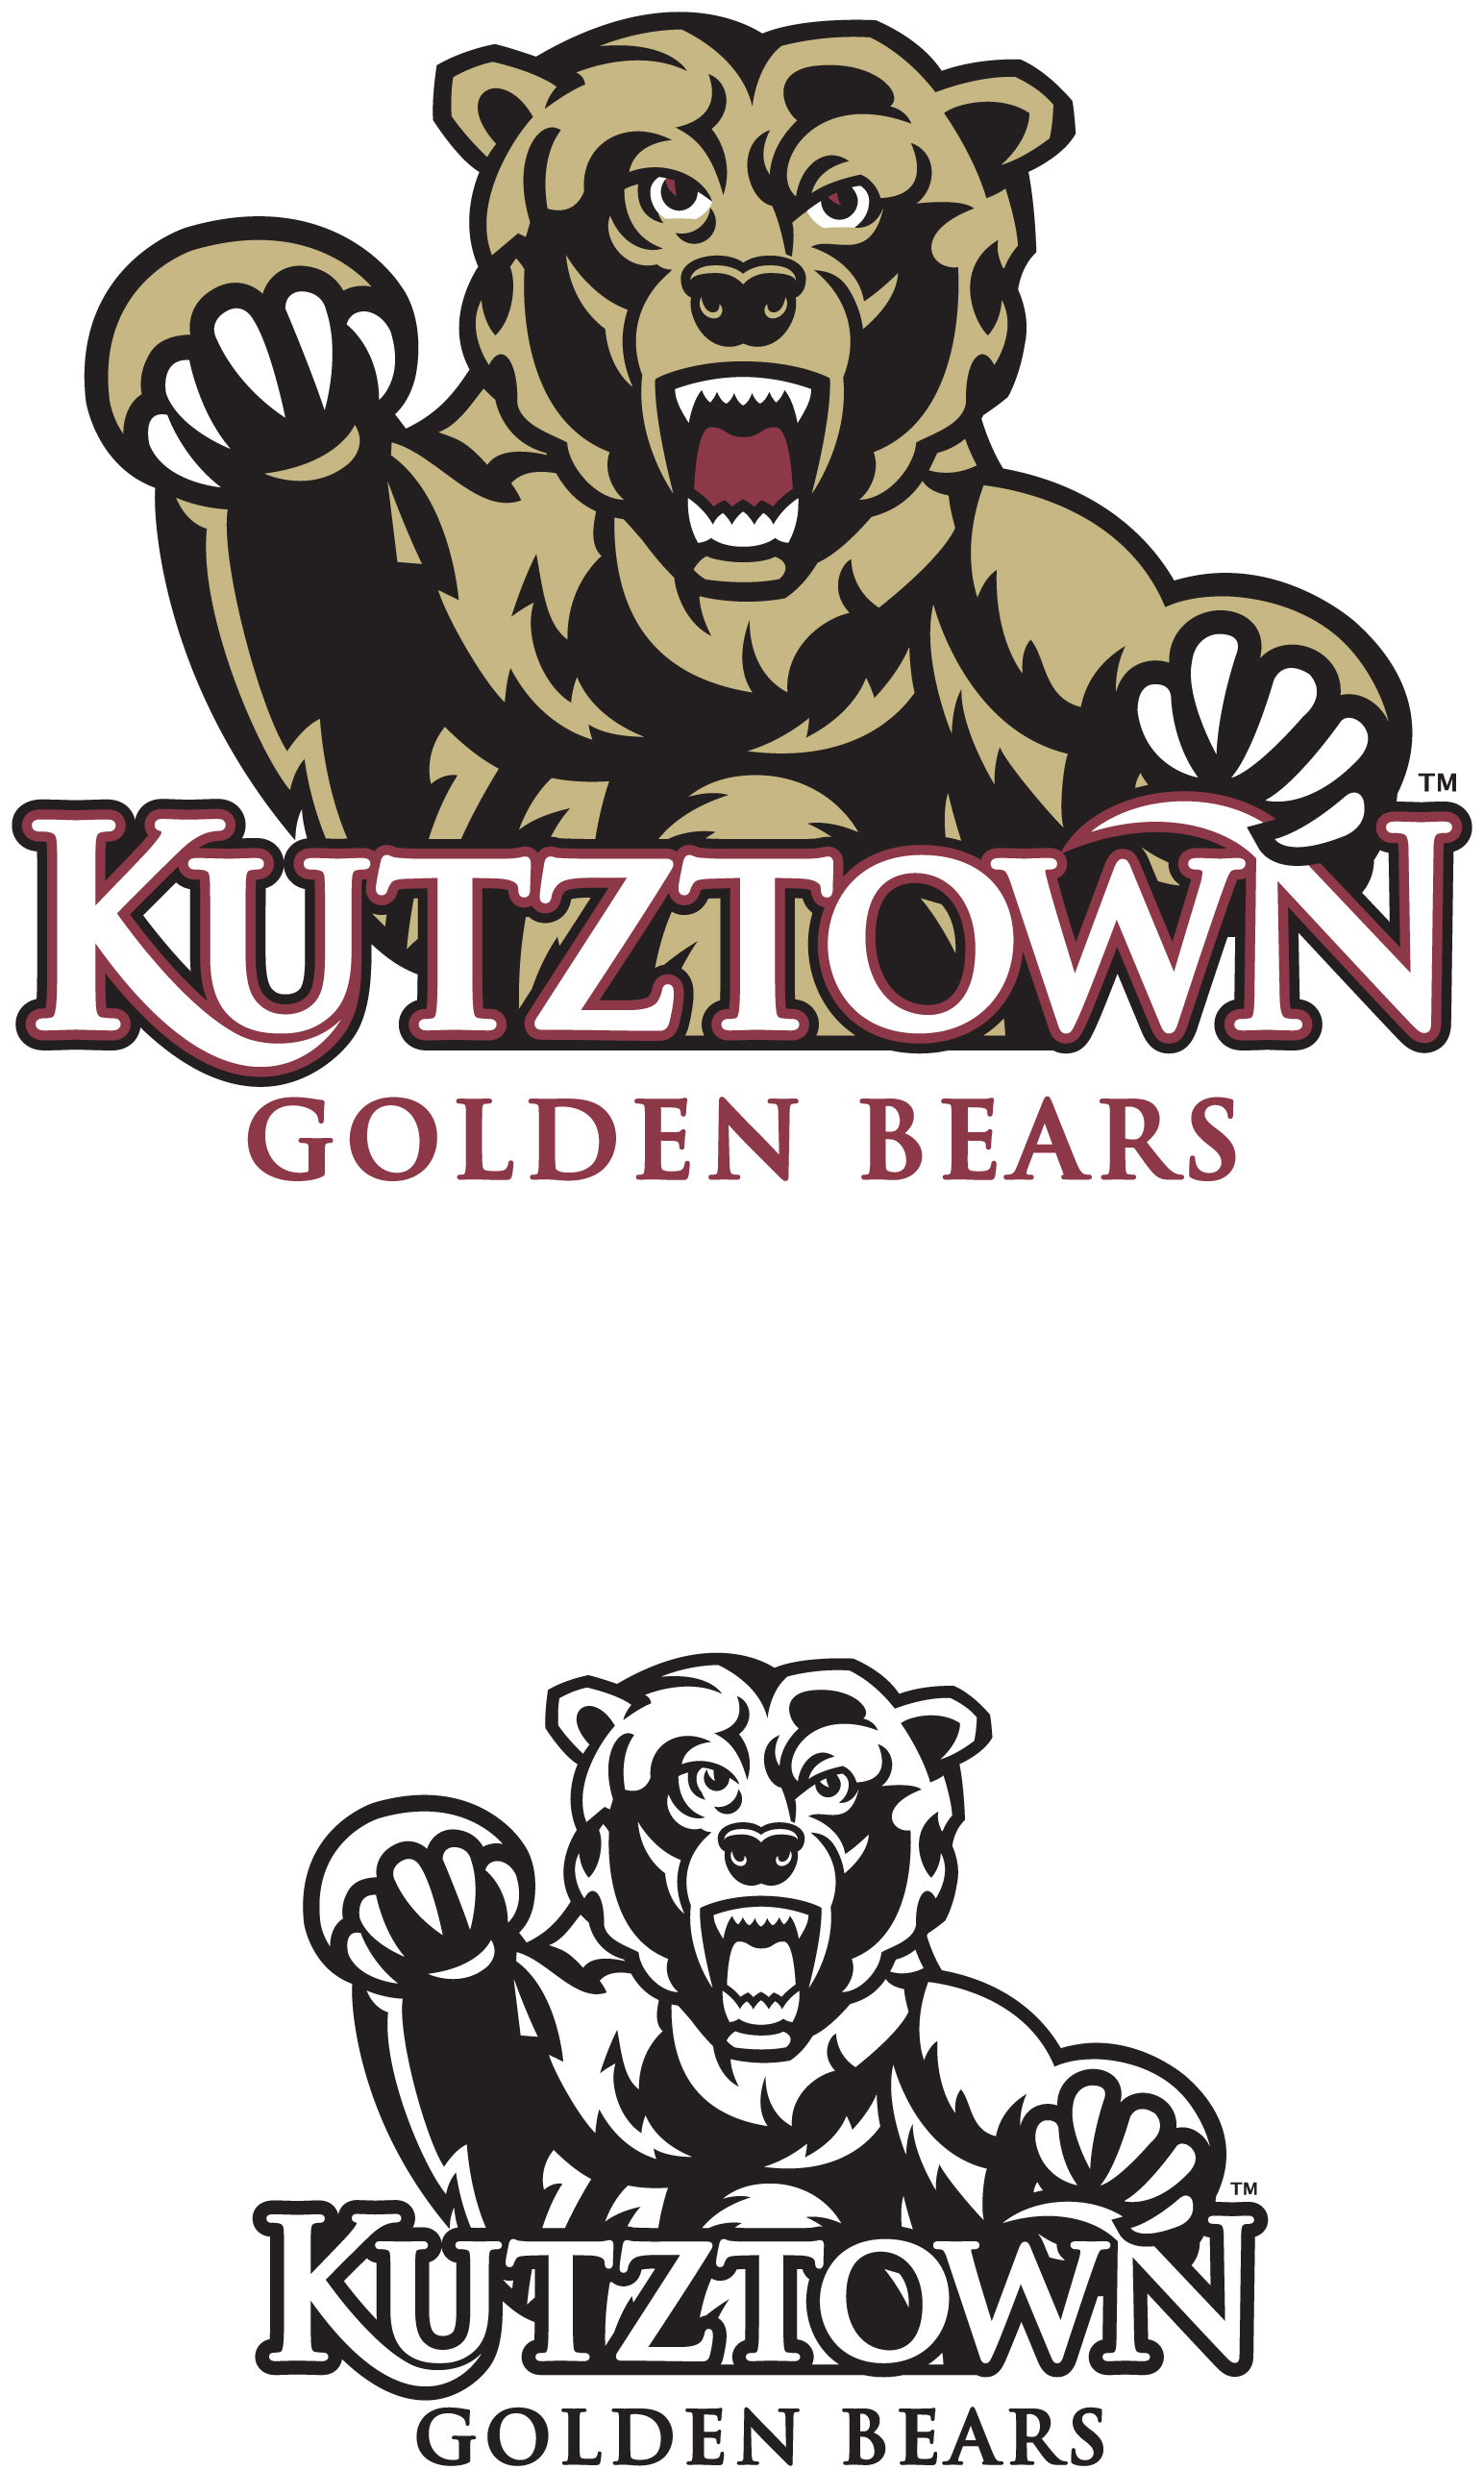 Chrome Metal with Domed Graphics WinCraft Kutztown University Golden Bears Premium Auto Emblem Decal